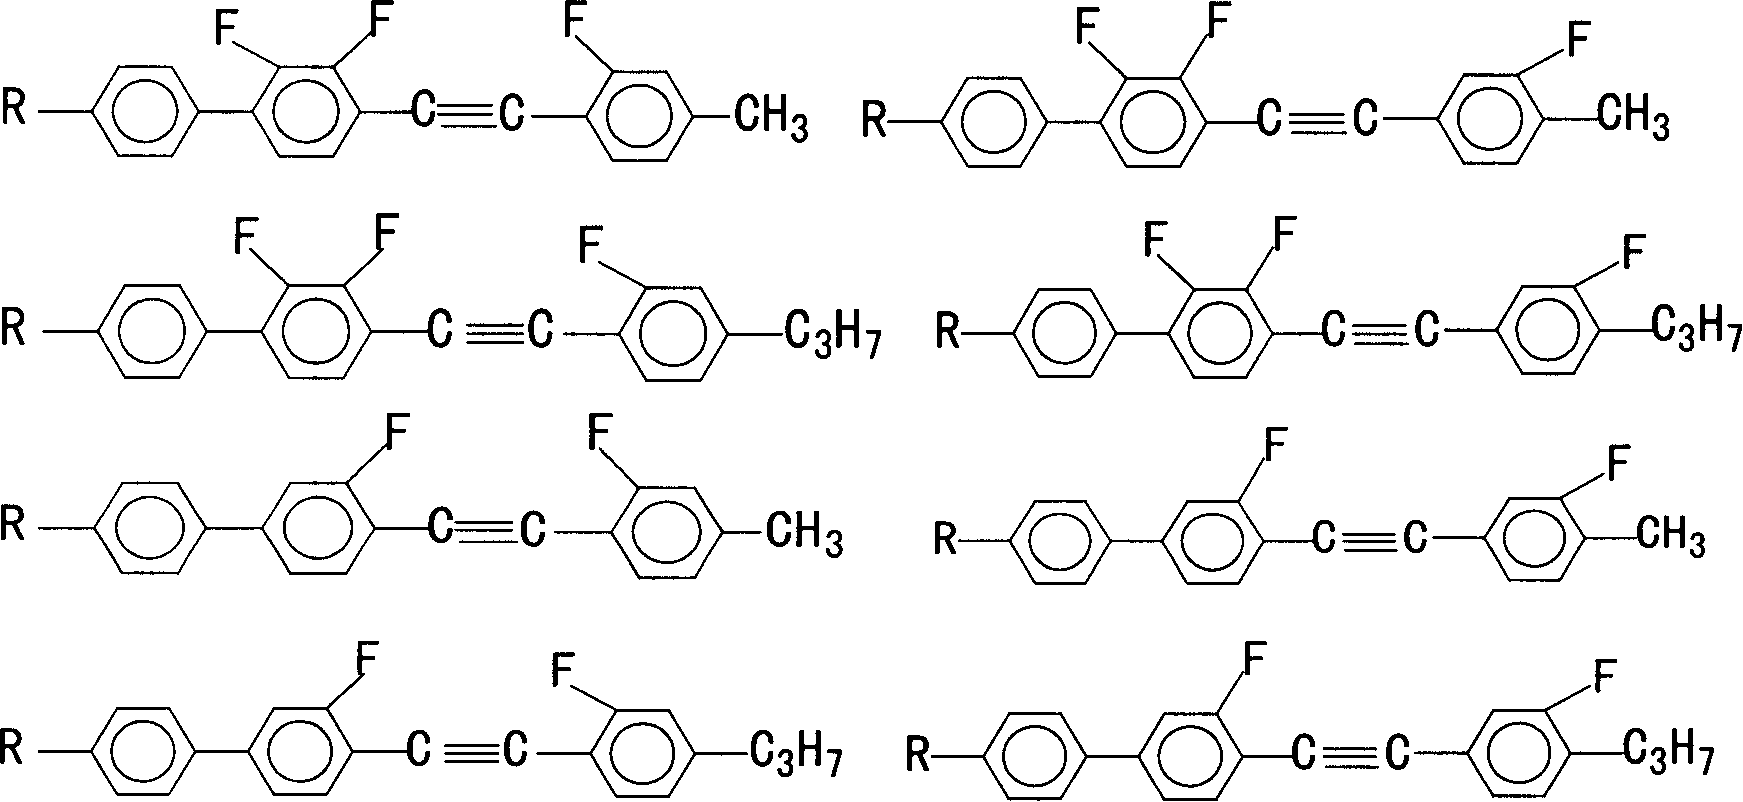 Multifluoro substituted diphenyl acetylene derivative, composition containing multifluoro substituted diphenyl acetylene derivatire, its preparation method and use